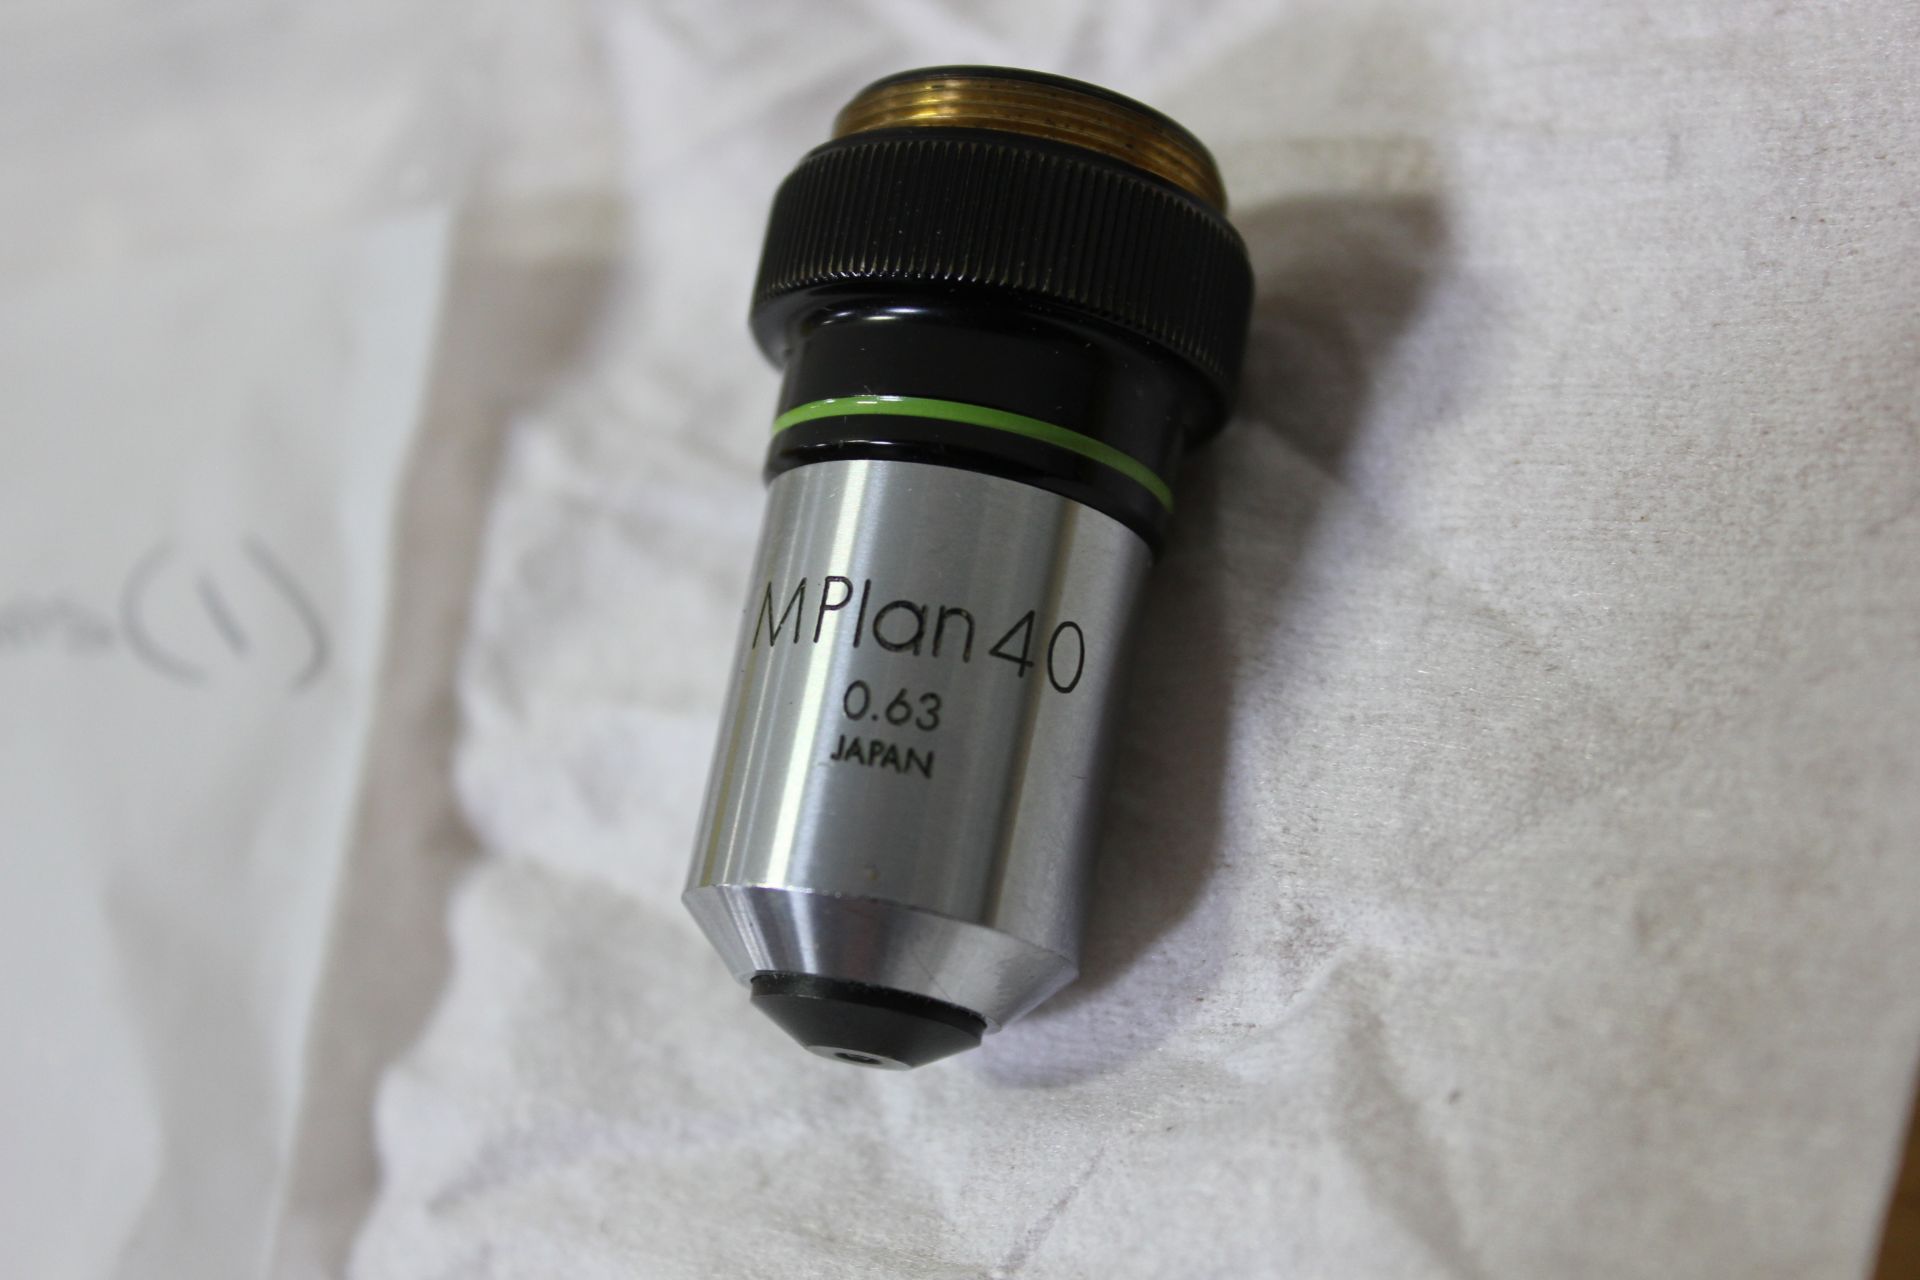 OLYMPUS M PLAN 40 0.63 MICROSCOPE OBJECTIVE - Image 2 of 5